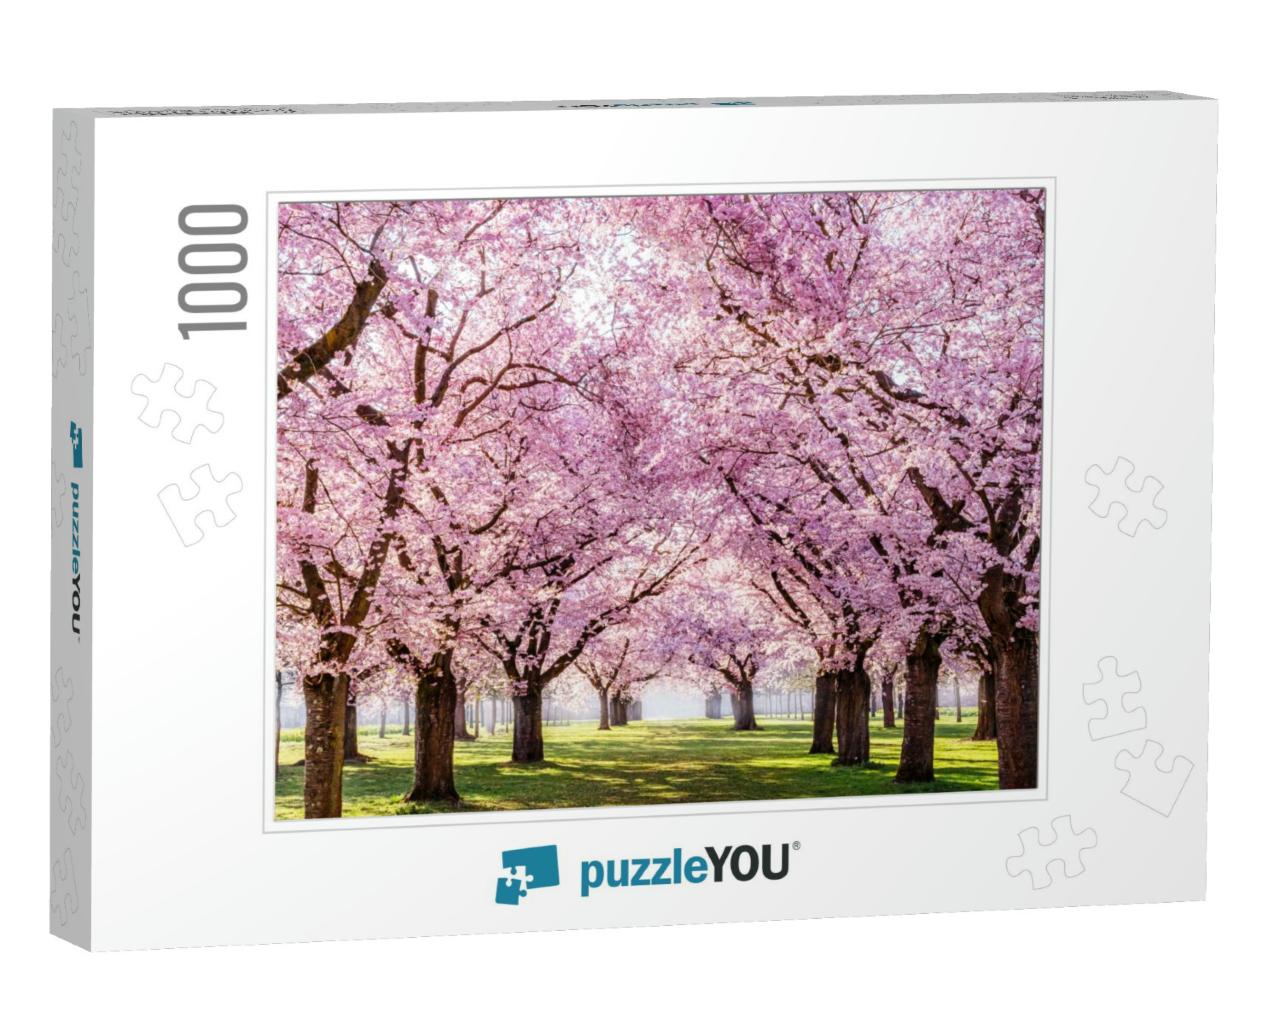 Sakura Cherry Blossoming Alley. Wonderful Scenic Park wit... Jigsaw Puzzle with 1000 pieces